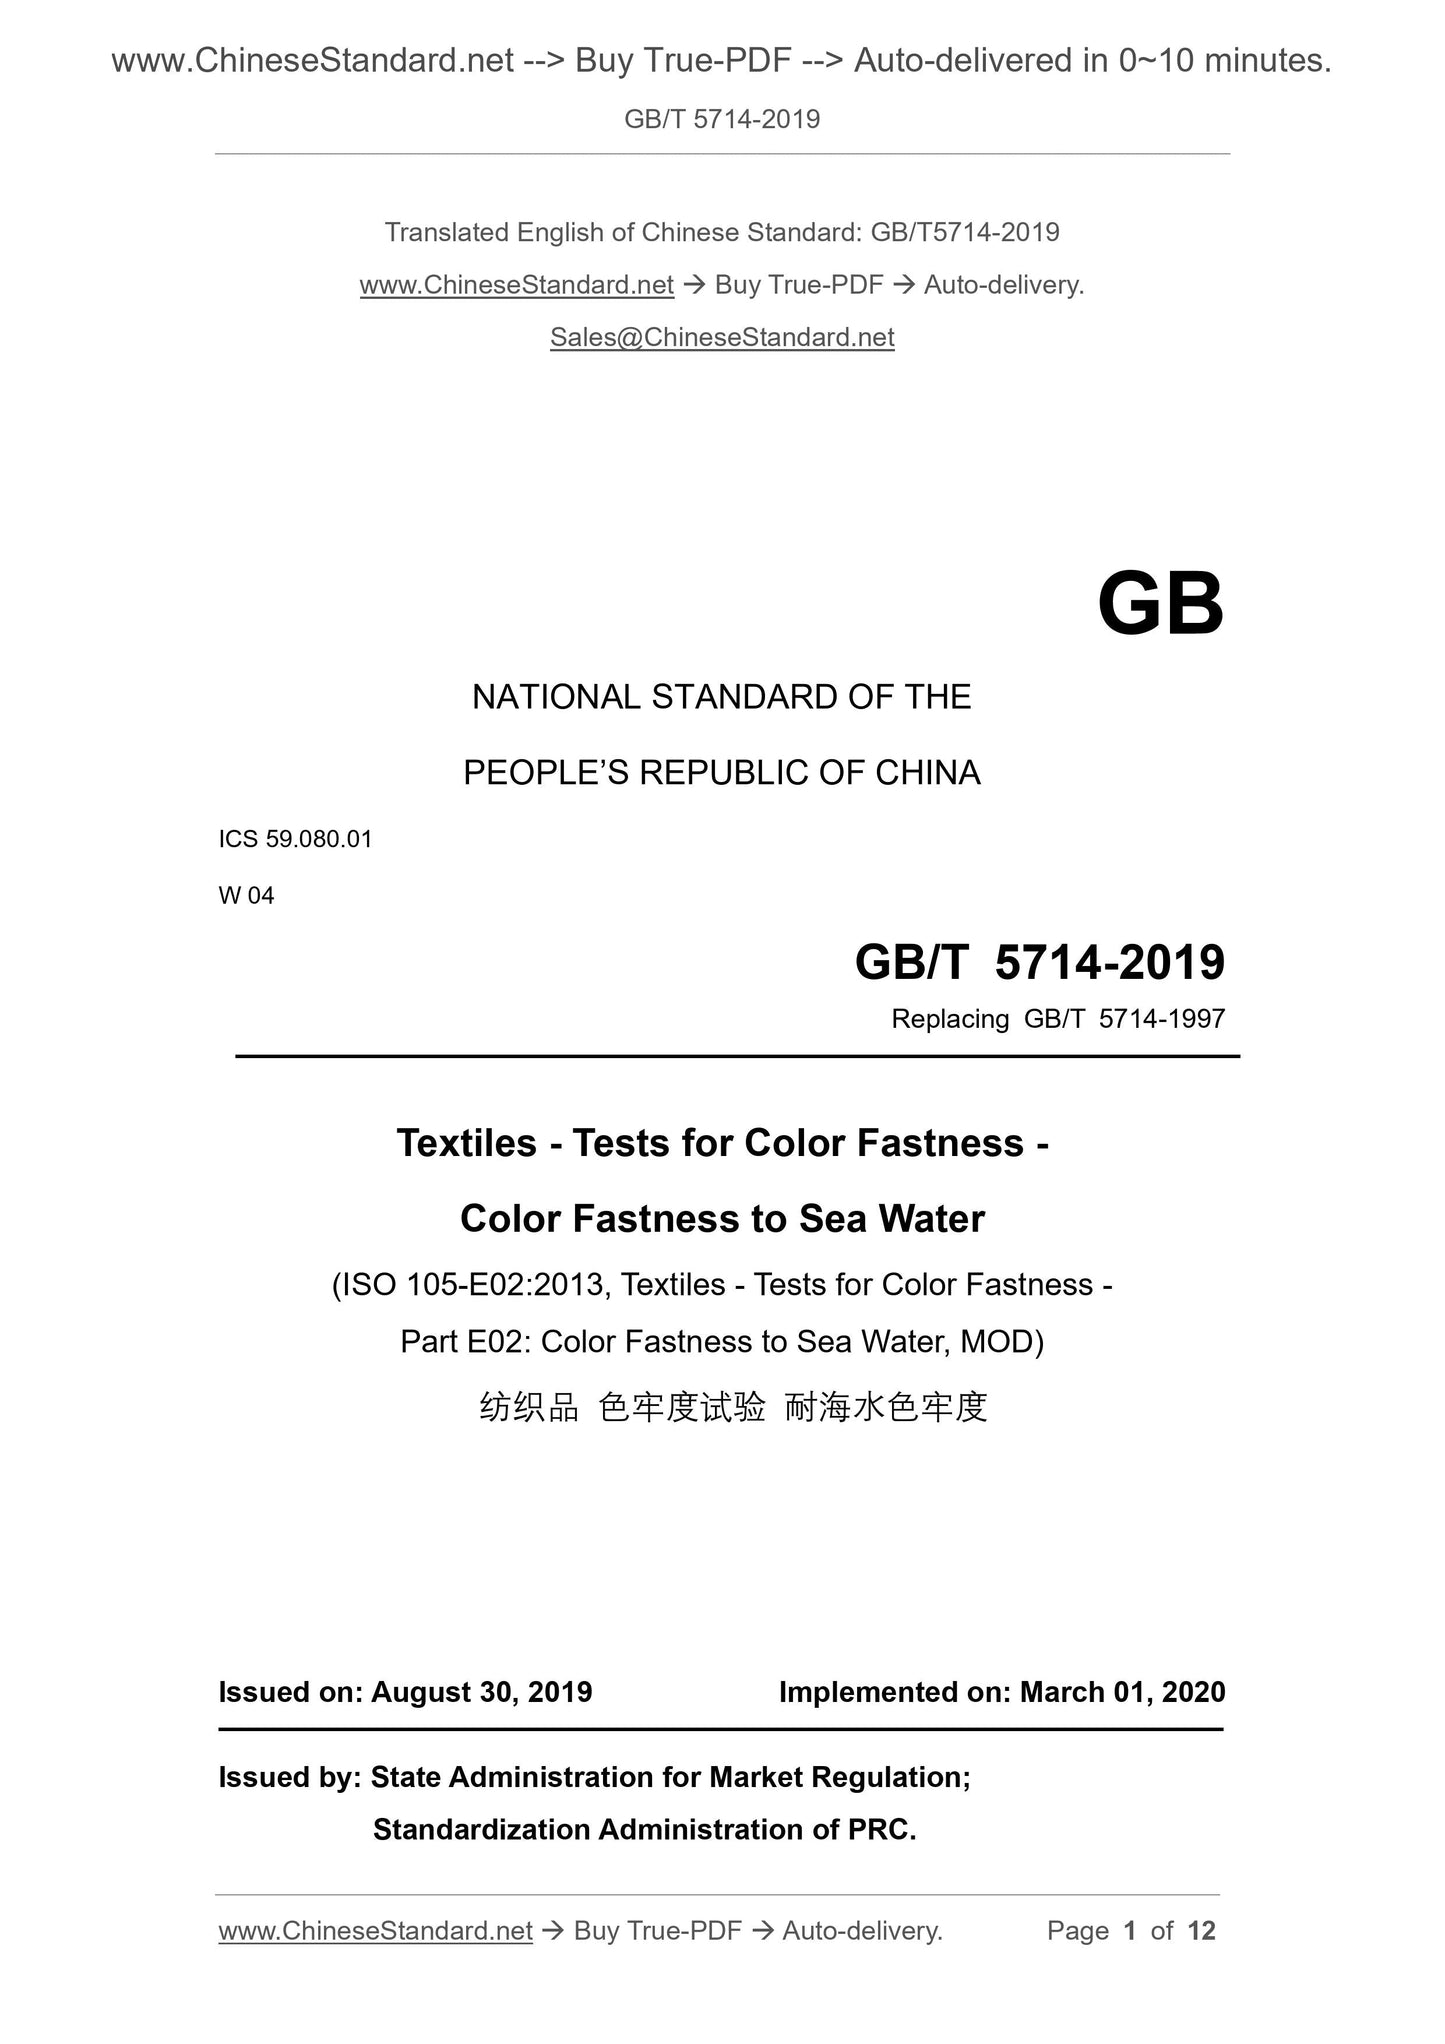 GB/T 5714-2019 Page 1